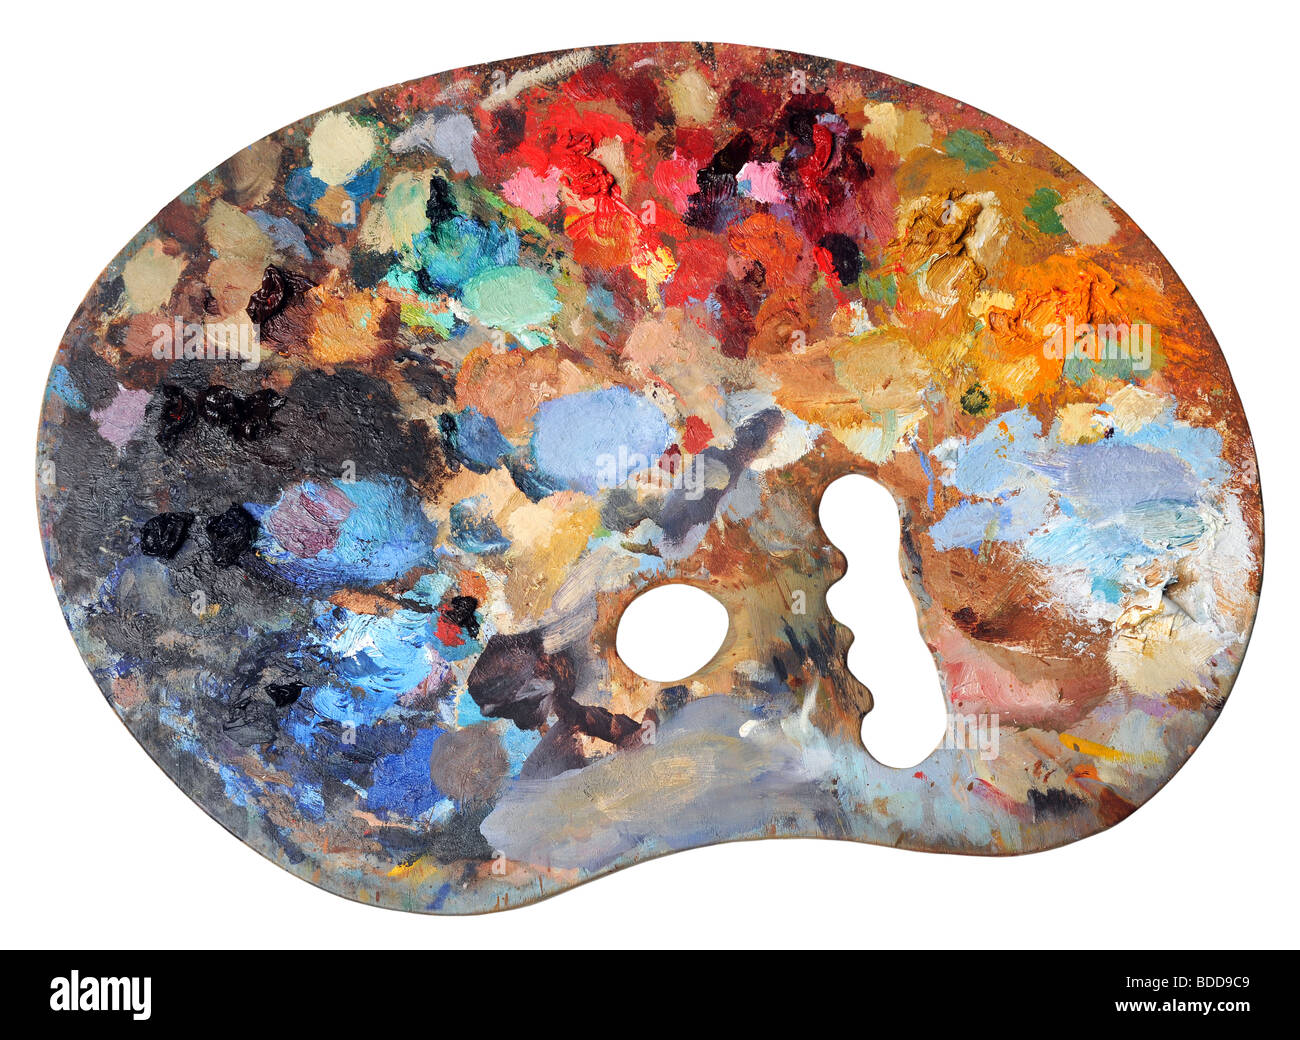 Ergonomic artist's palette isolated over a white background Stock Photo